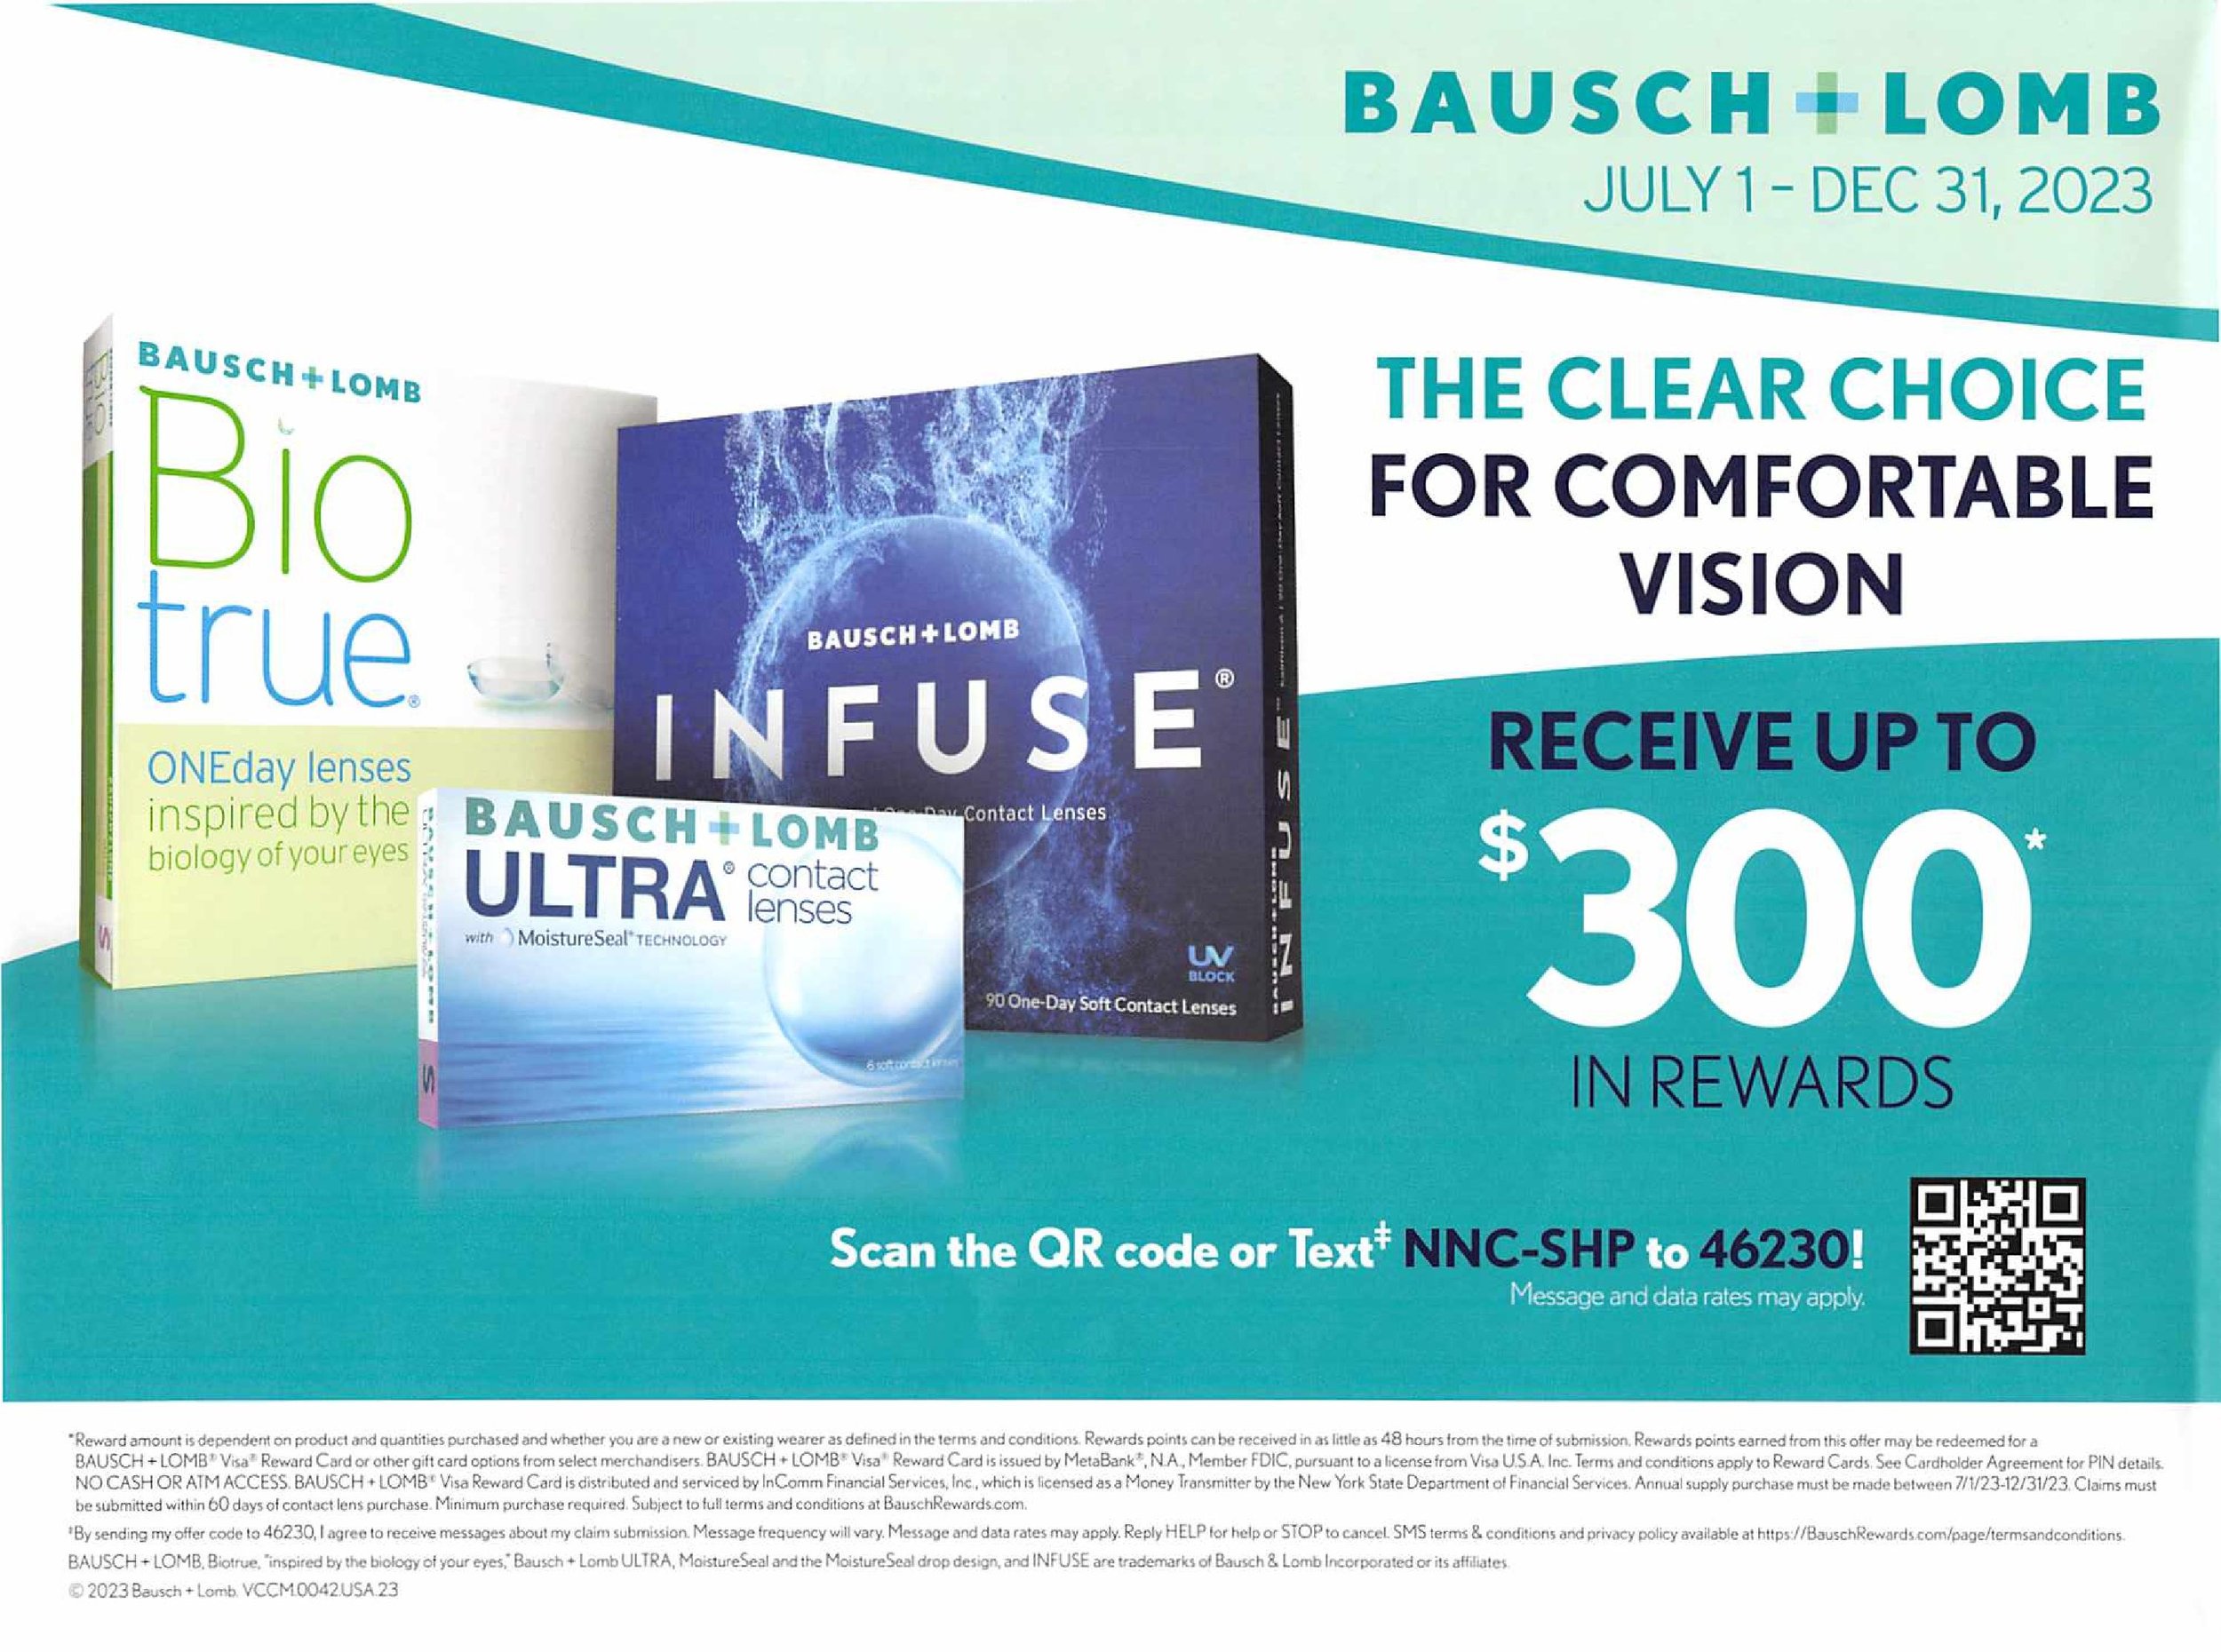 bausch-lomb-brand-contact-lenses-framesdirect